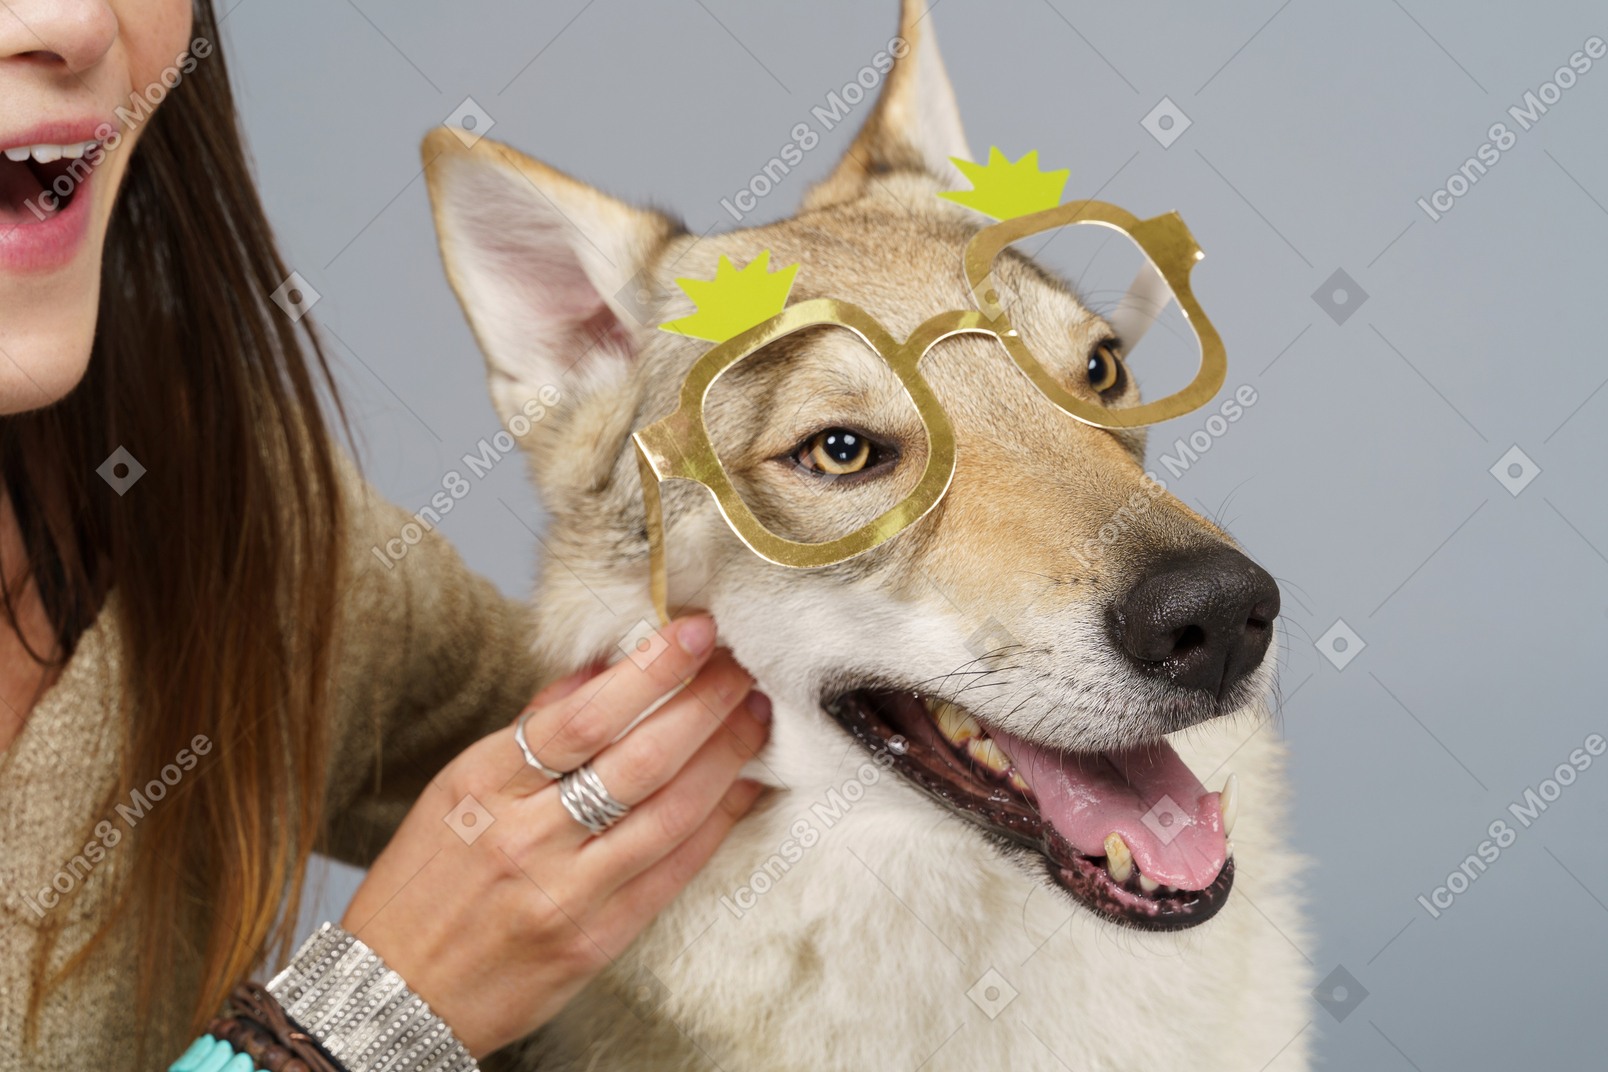 Close-up of a young woman trying glasses on her dog